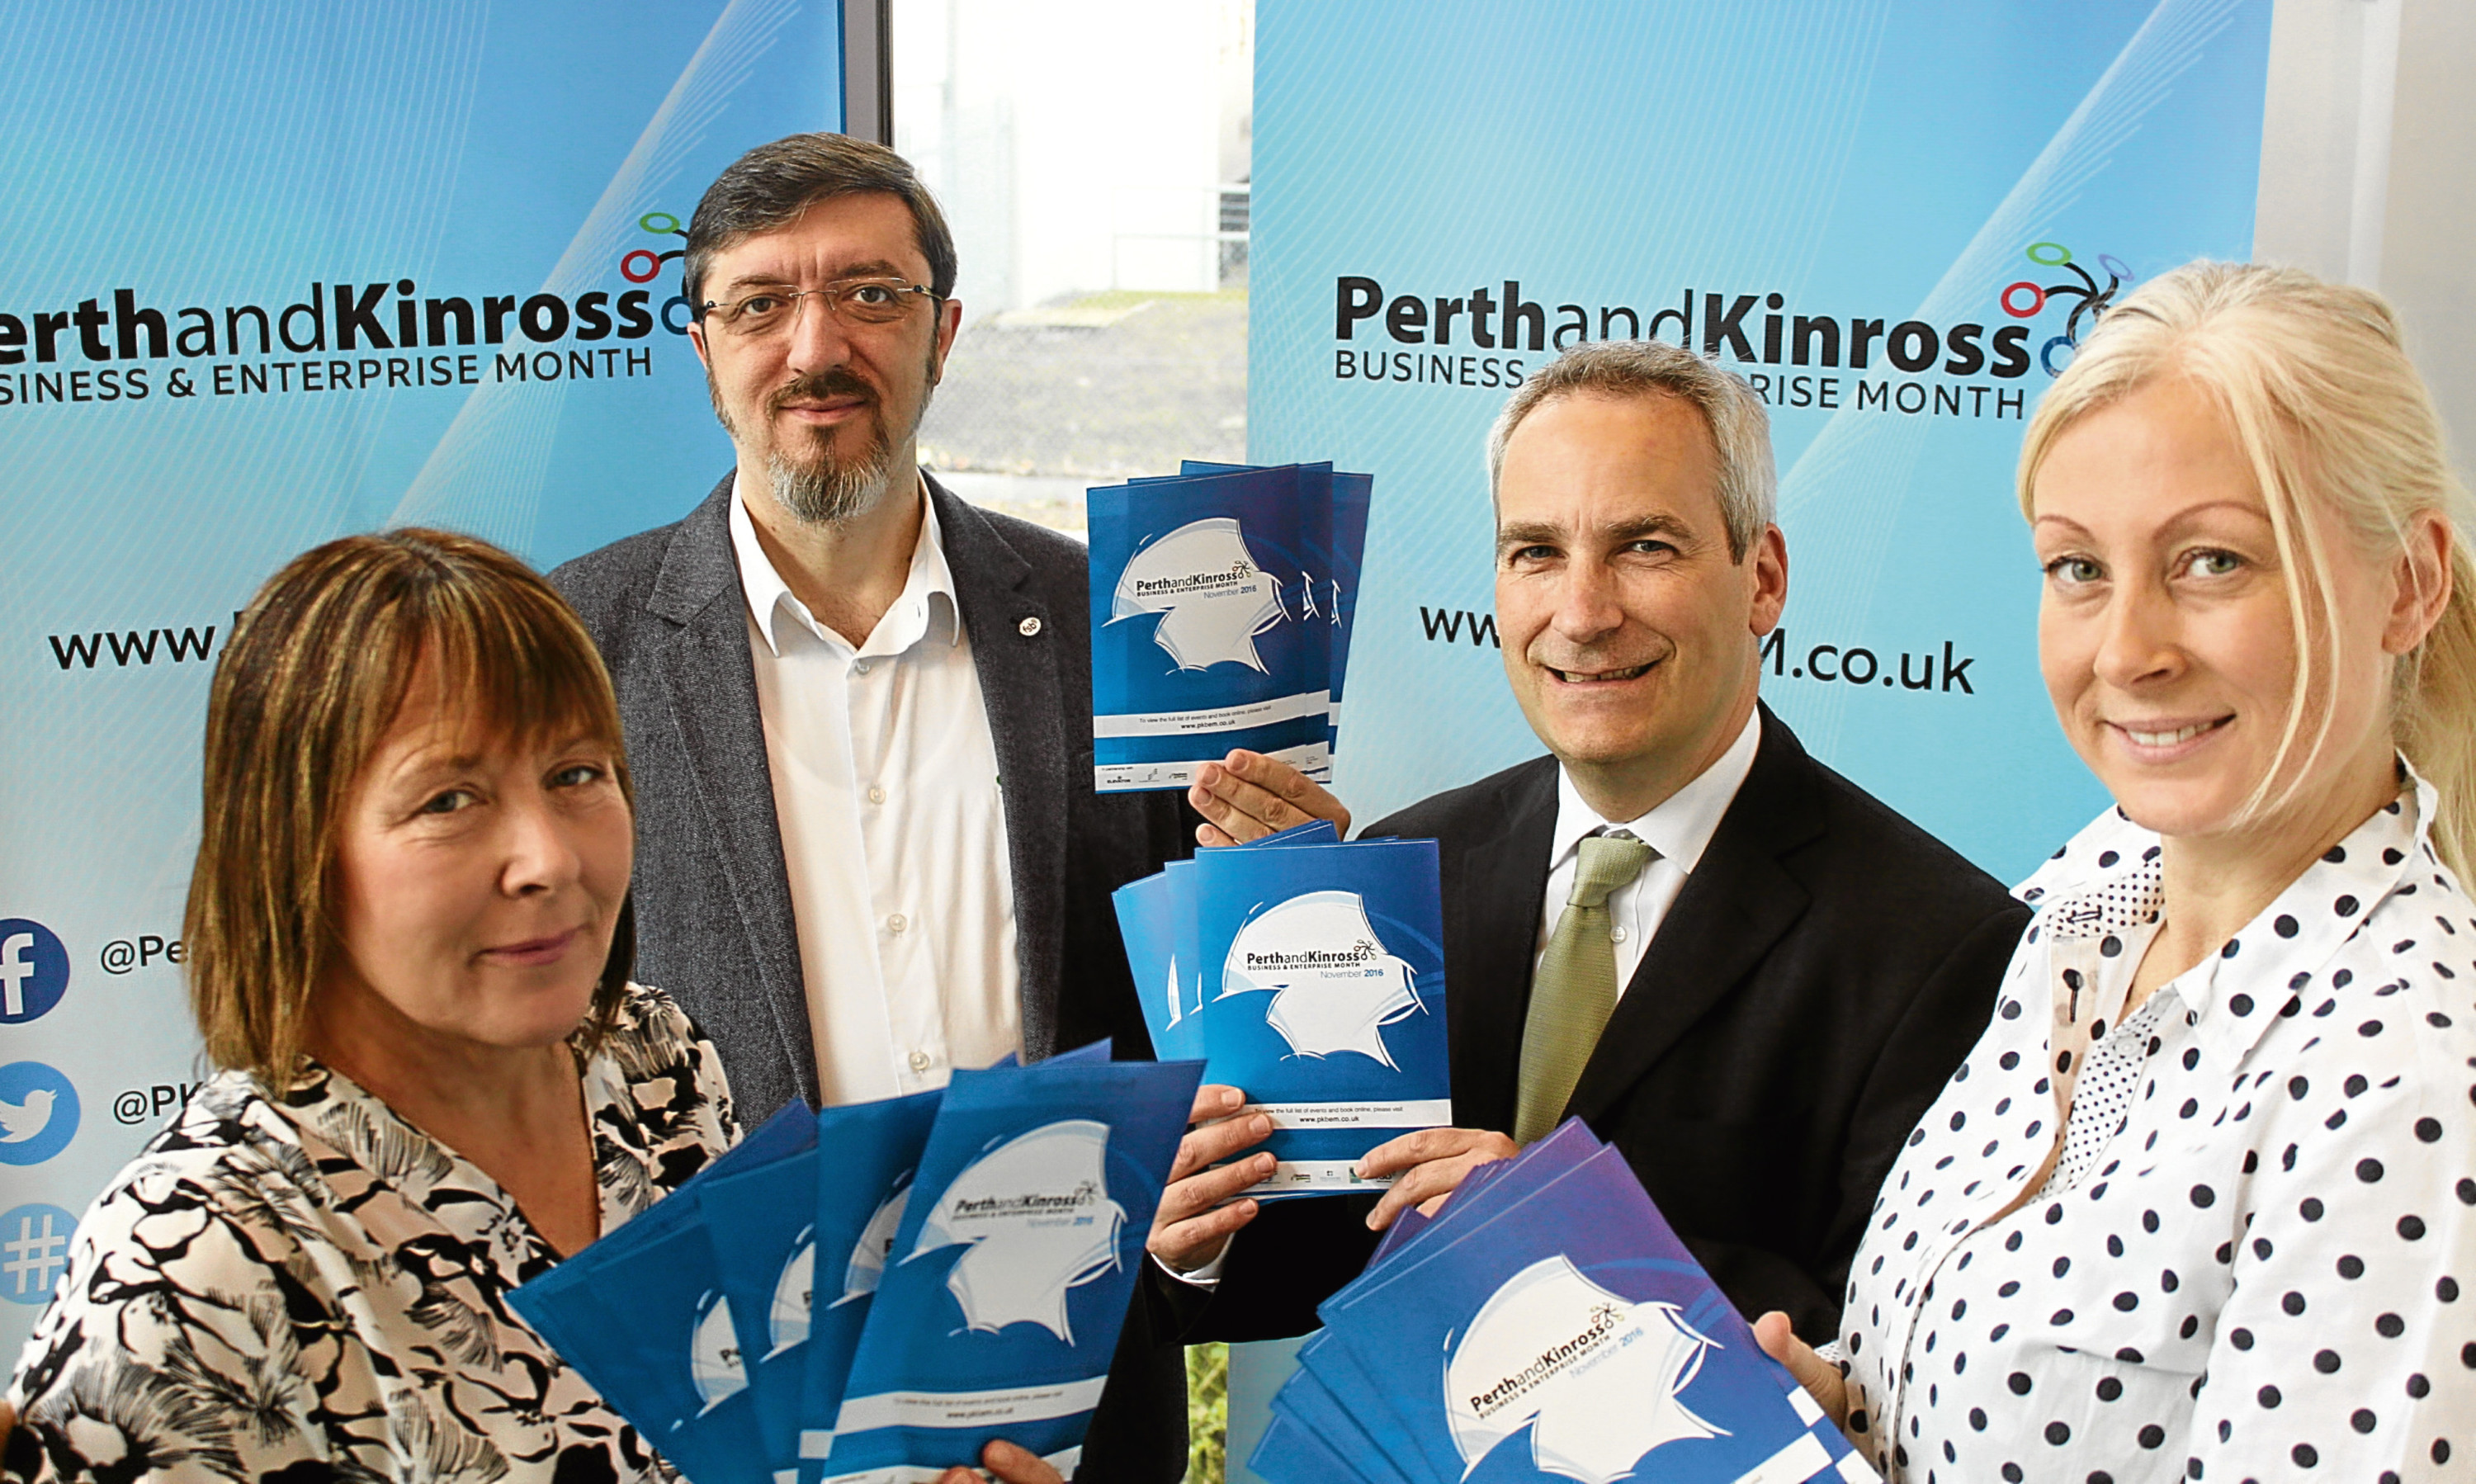 Spreading the word about Perth and Kinross Business and Enterprise month are Lynn McCabe, Corrado Mella, Alan Graham and Perthshire Chamber CEO Vicki Unite.